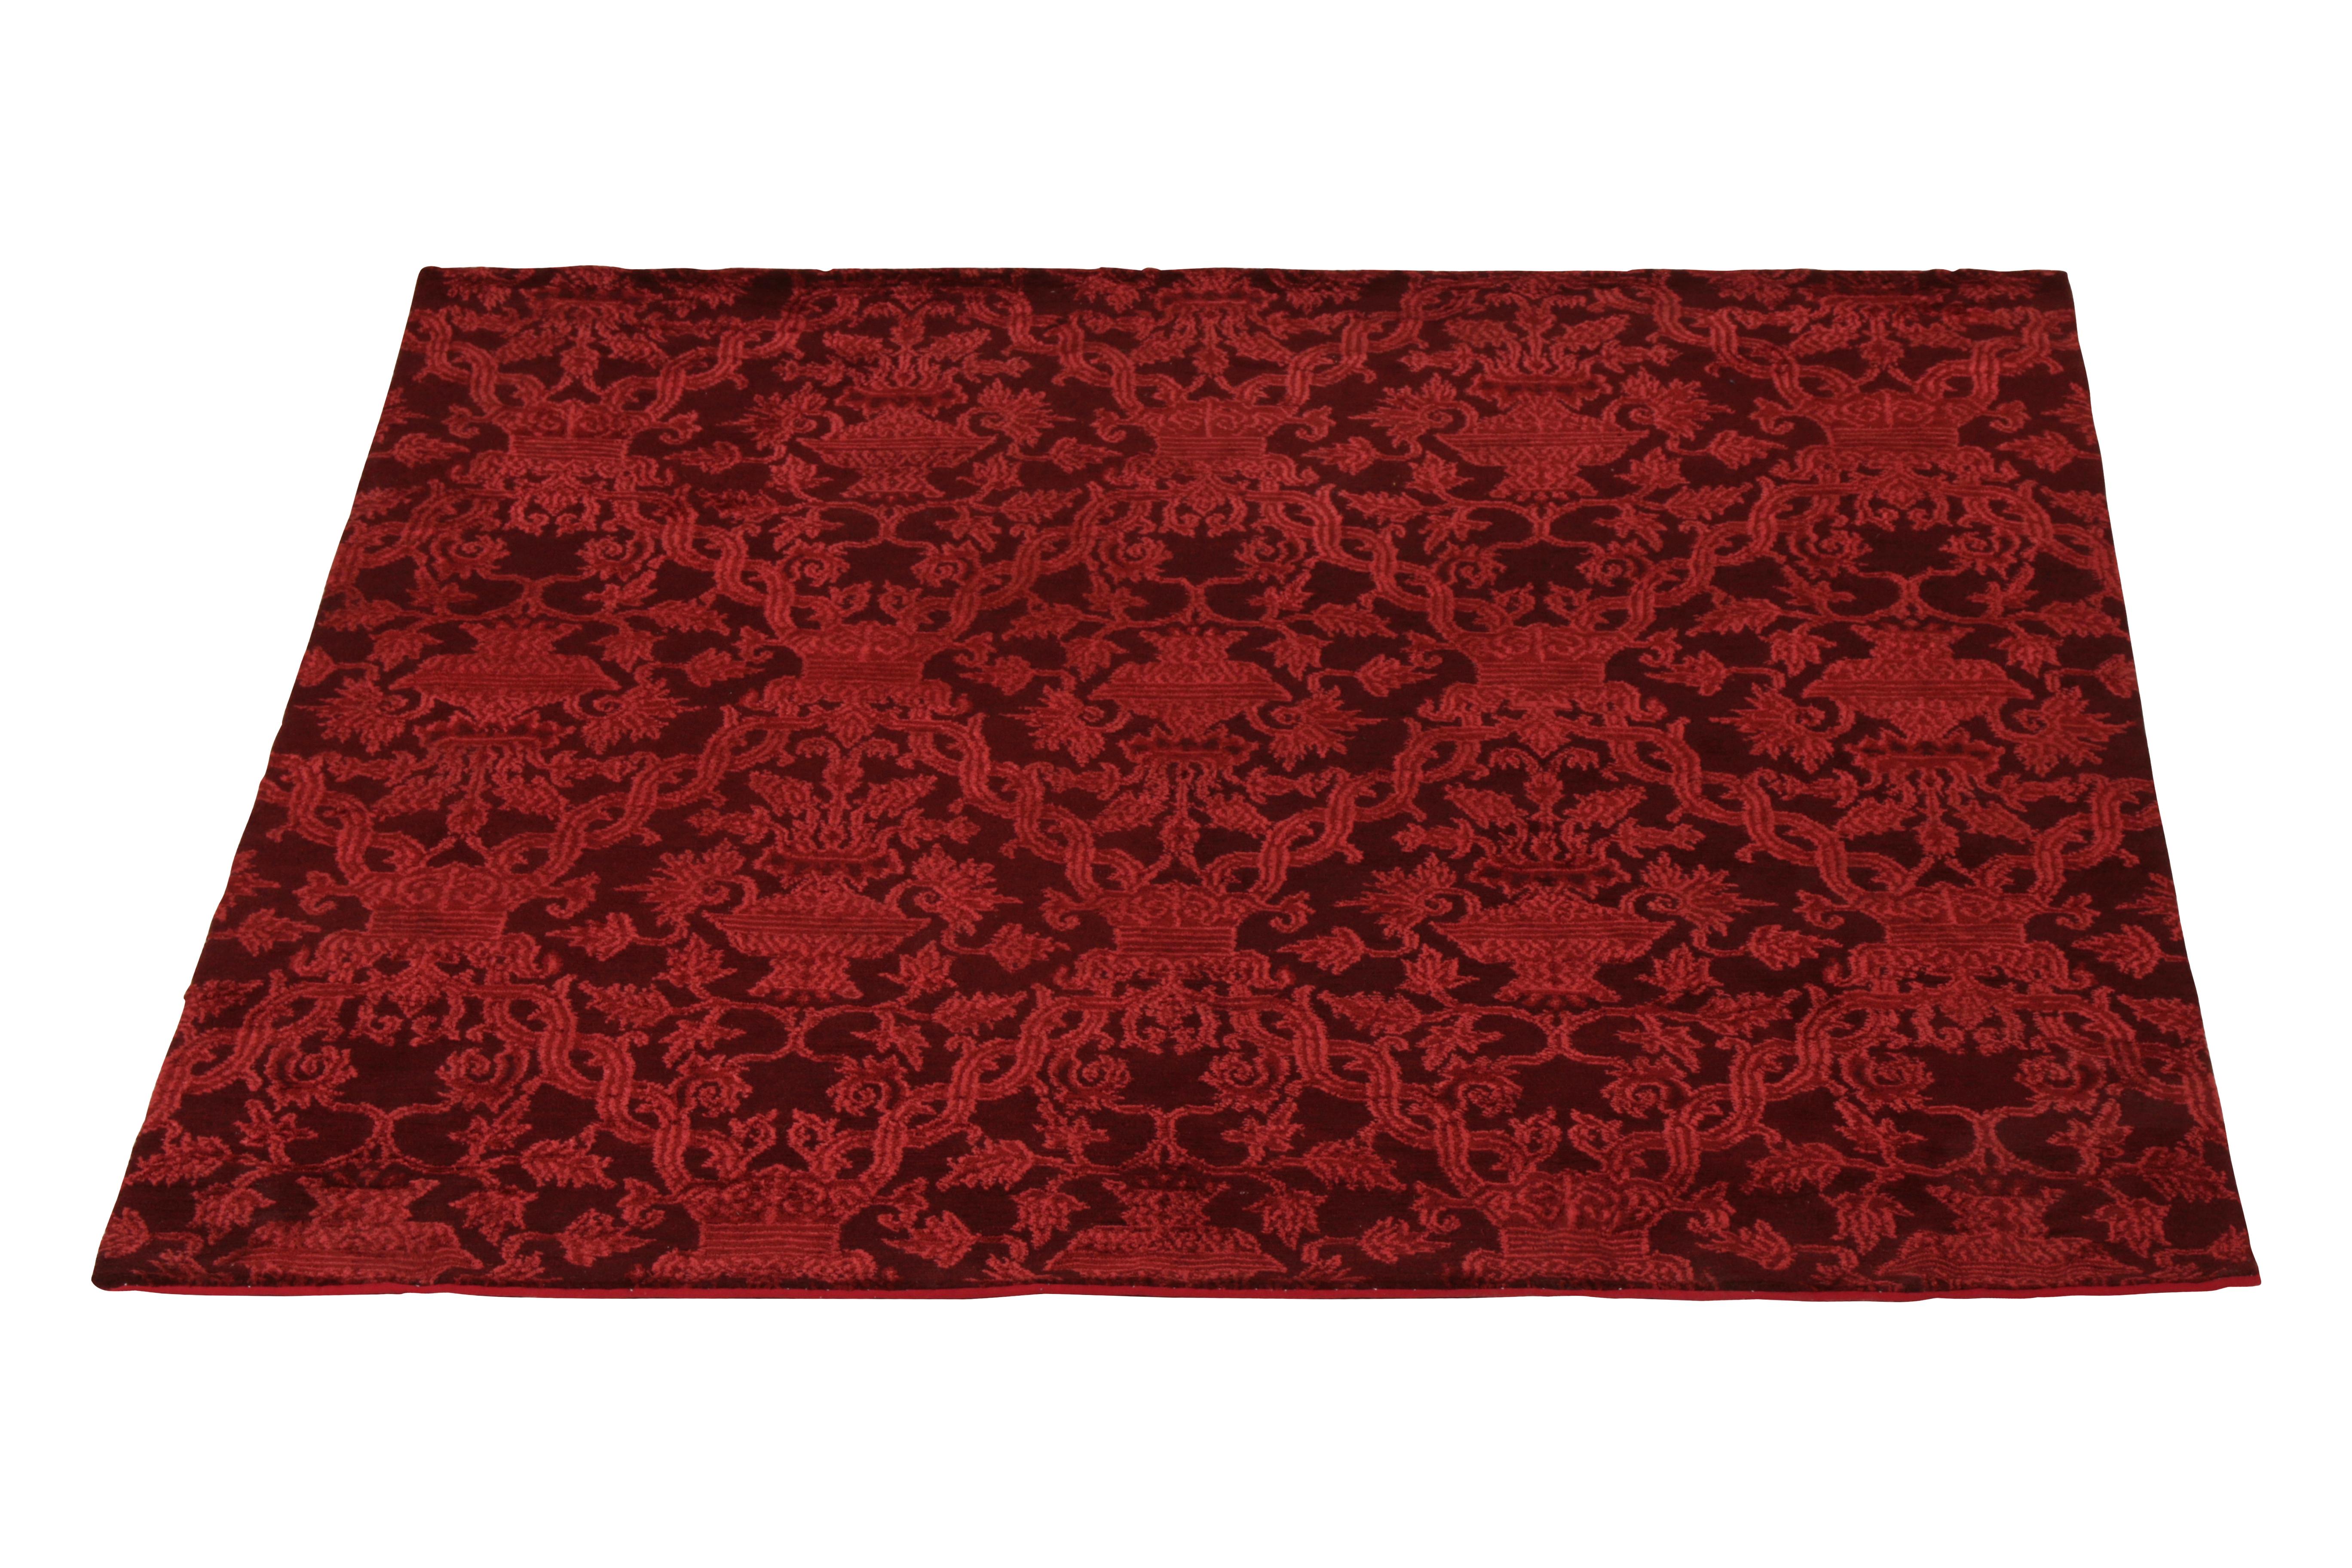 Hand knotted in a blend of wool and silk, this 5 x 6 square rug joins Rug & Kilim’s European rug collection, drawing inspiration from venerated Classic designs like this take on Italian sensibility in the richest burgundy and red hues. 

On the